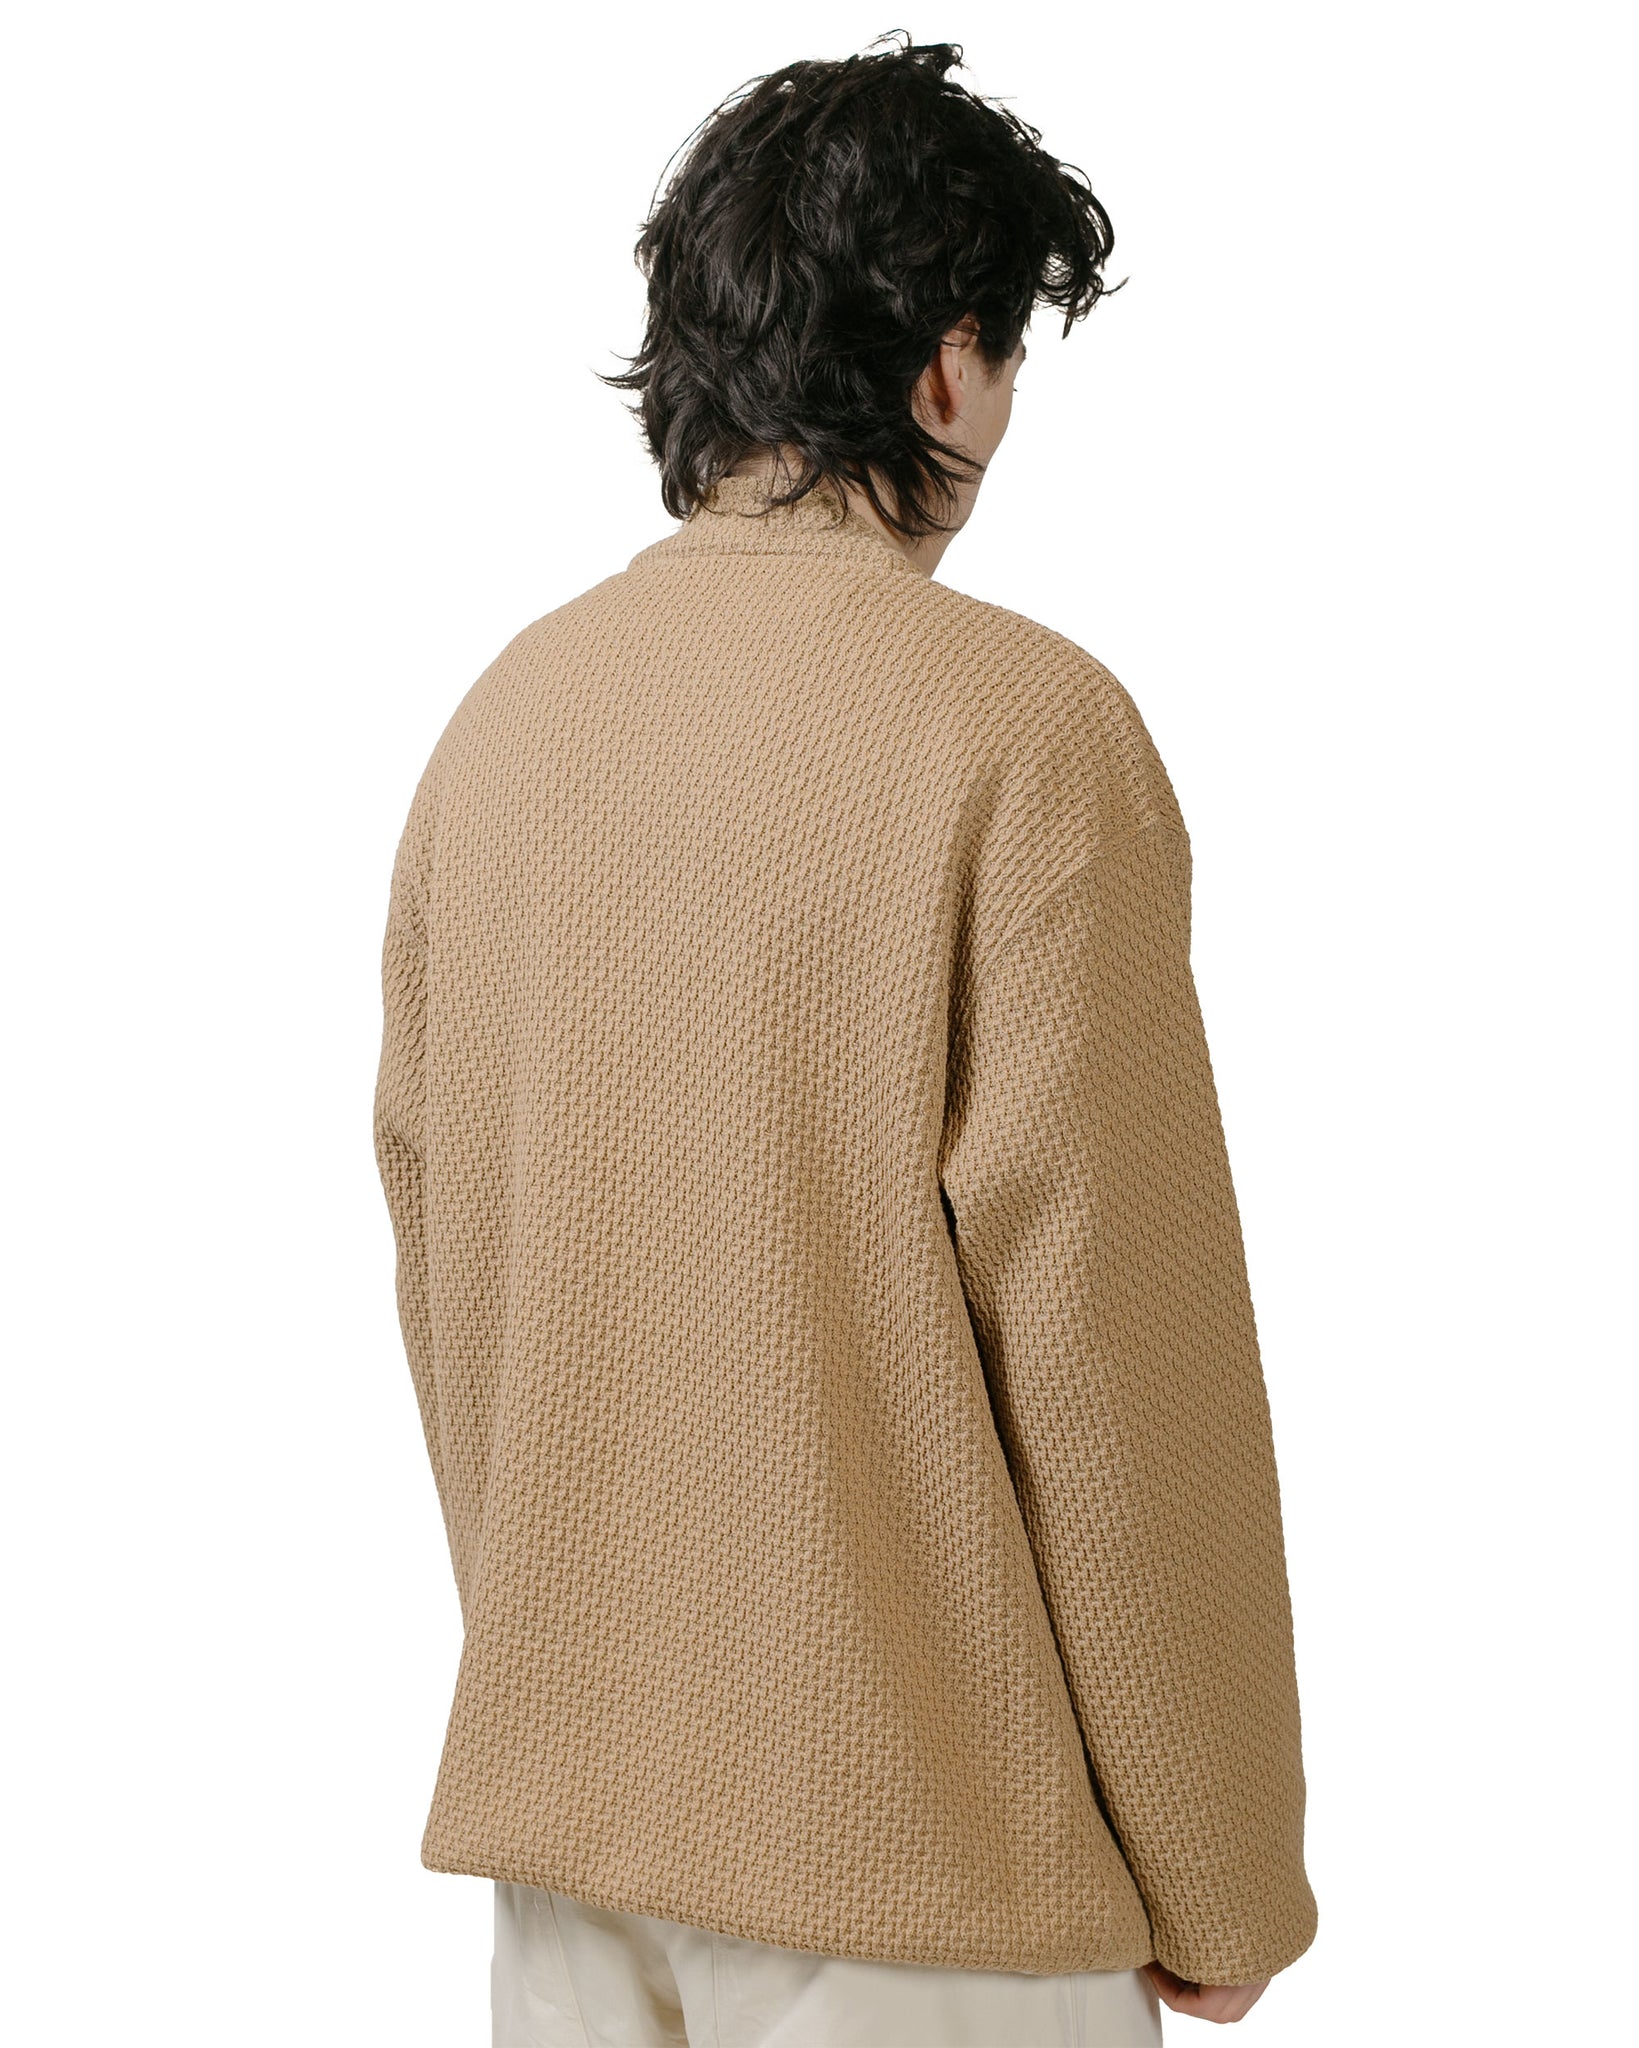 ts(s) Lined Easy Cardigan Cotton/Polyester Knitty Jersey Beige model back